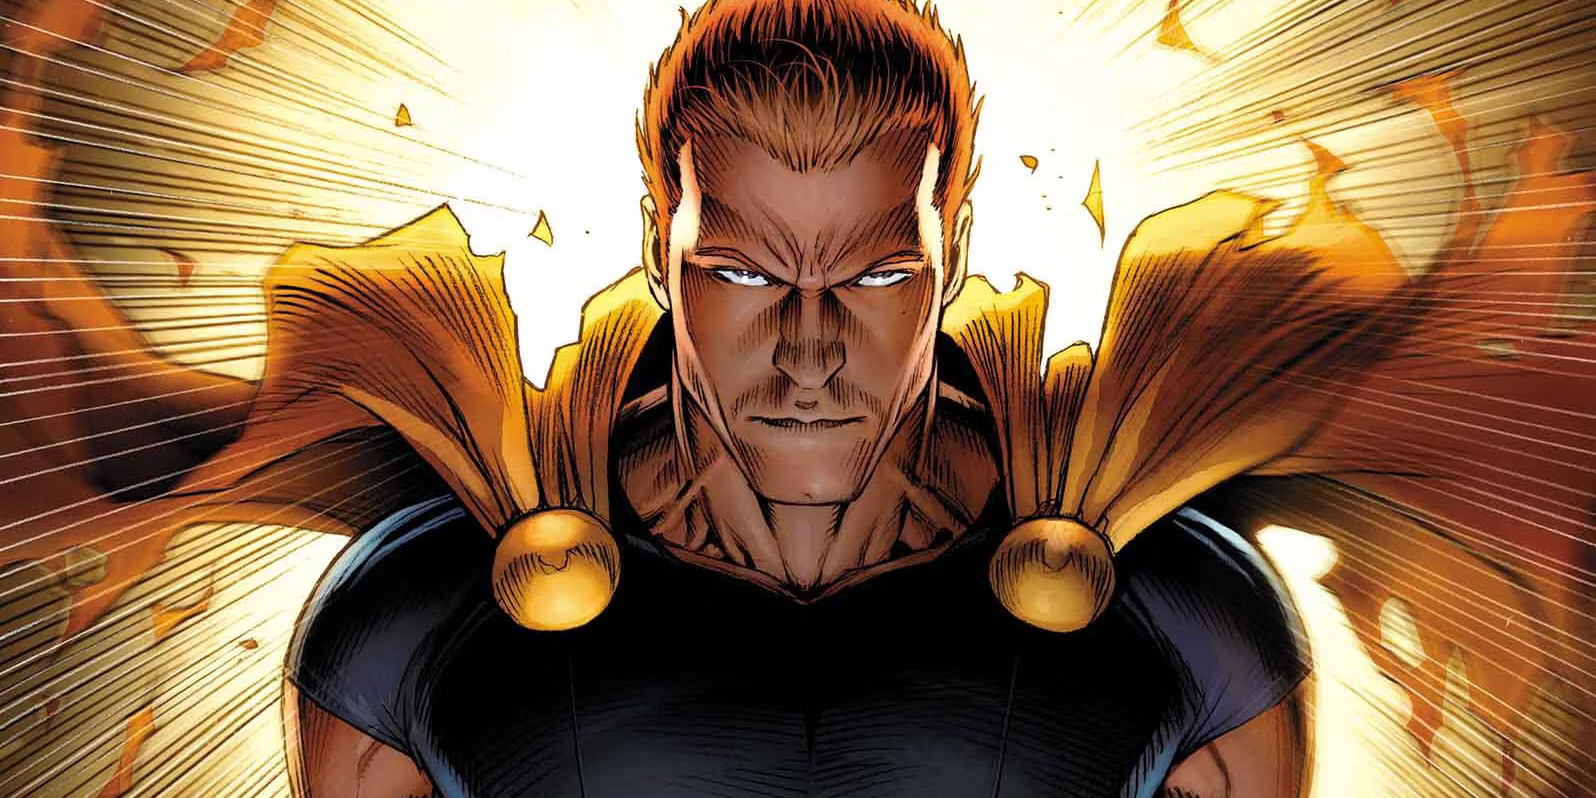 Henry Cavill can take the role of Hyperion in the upcoming movies.